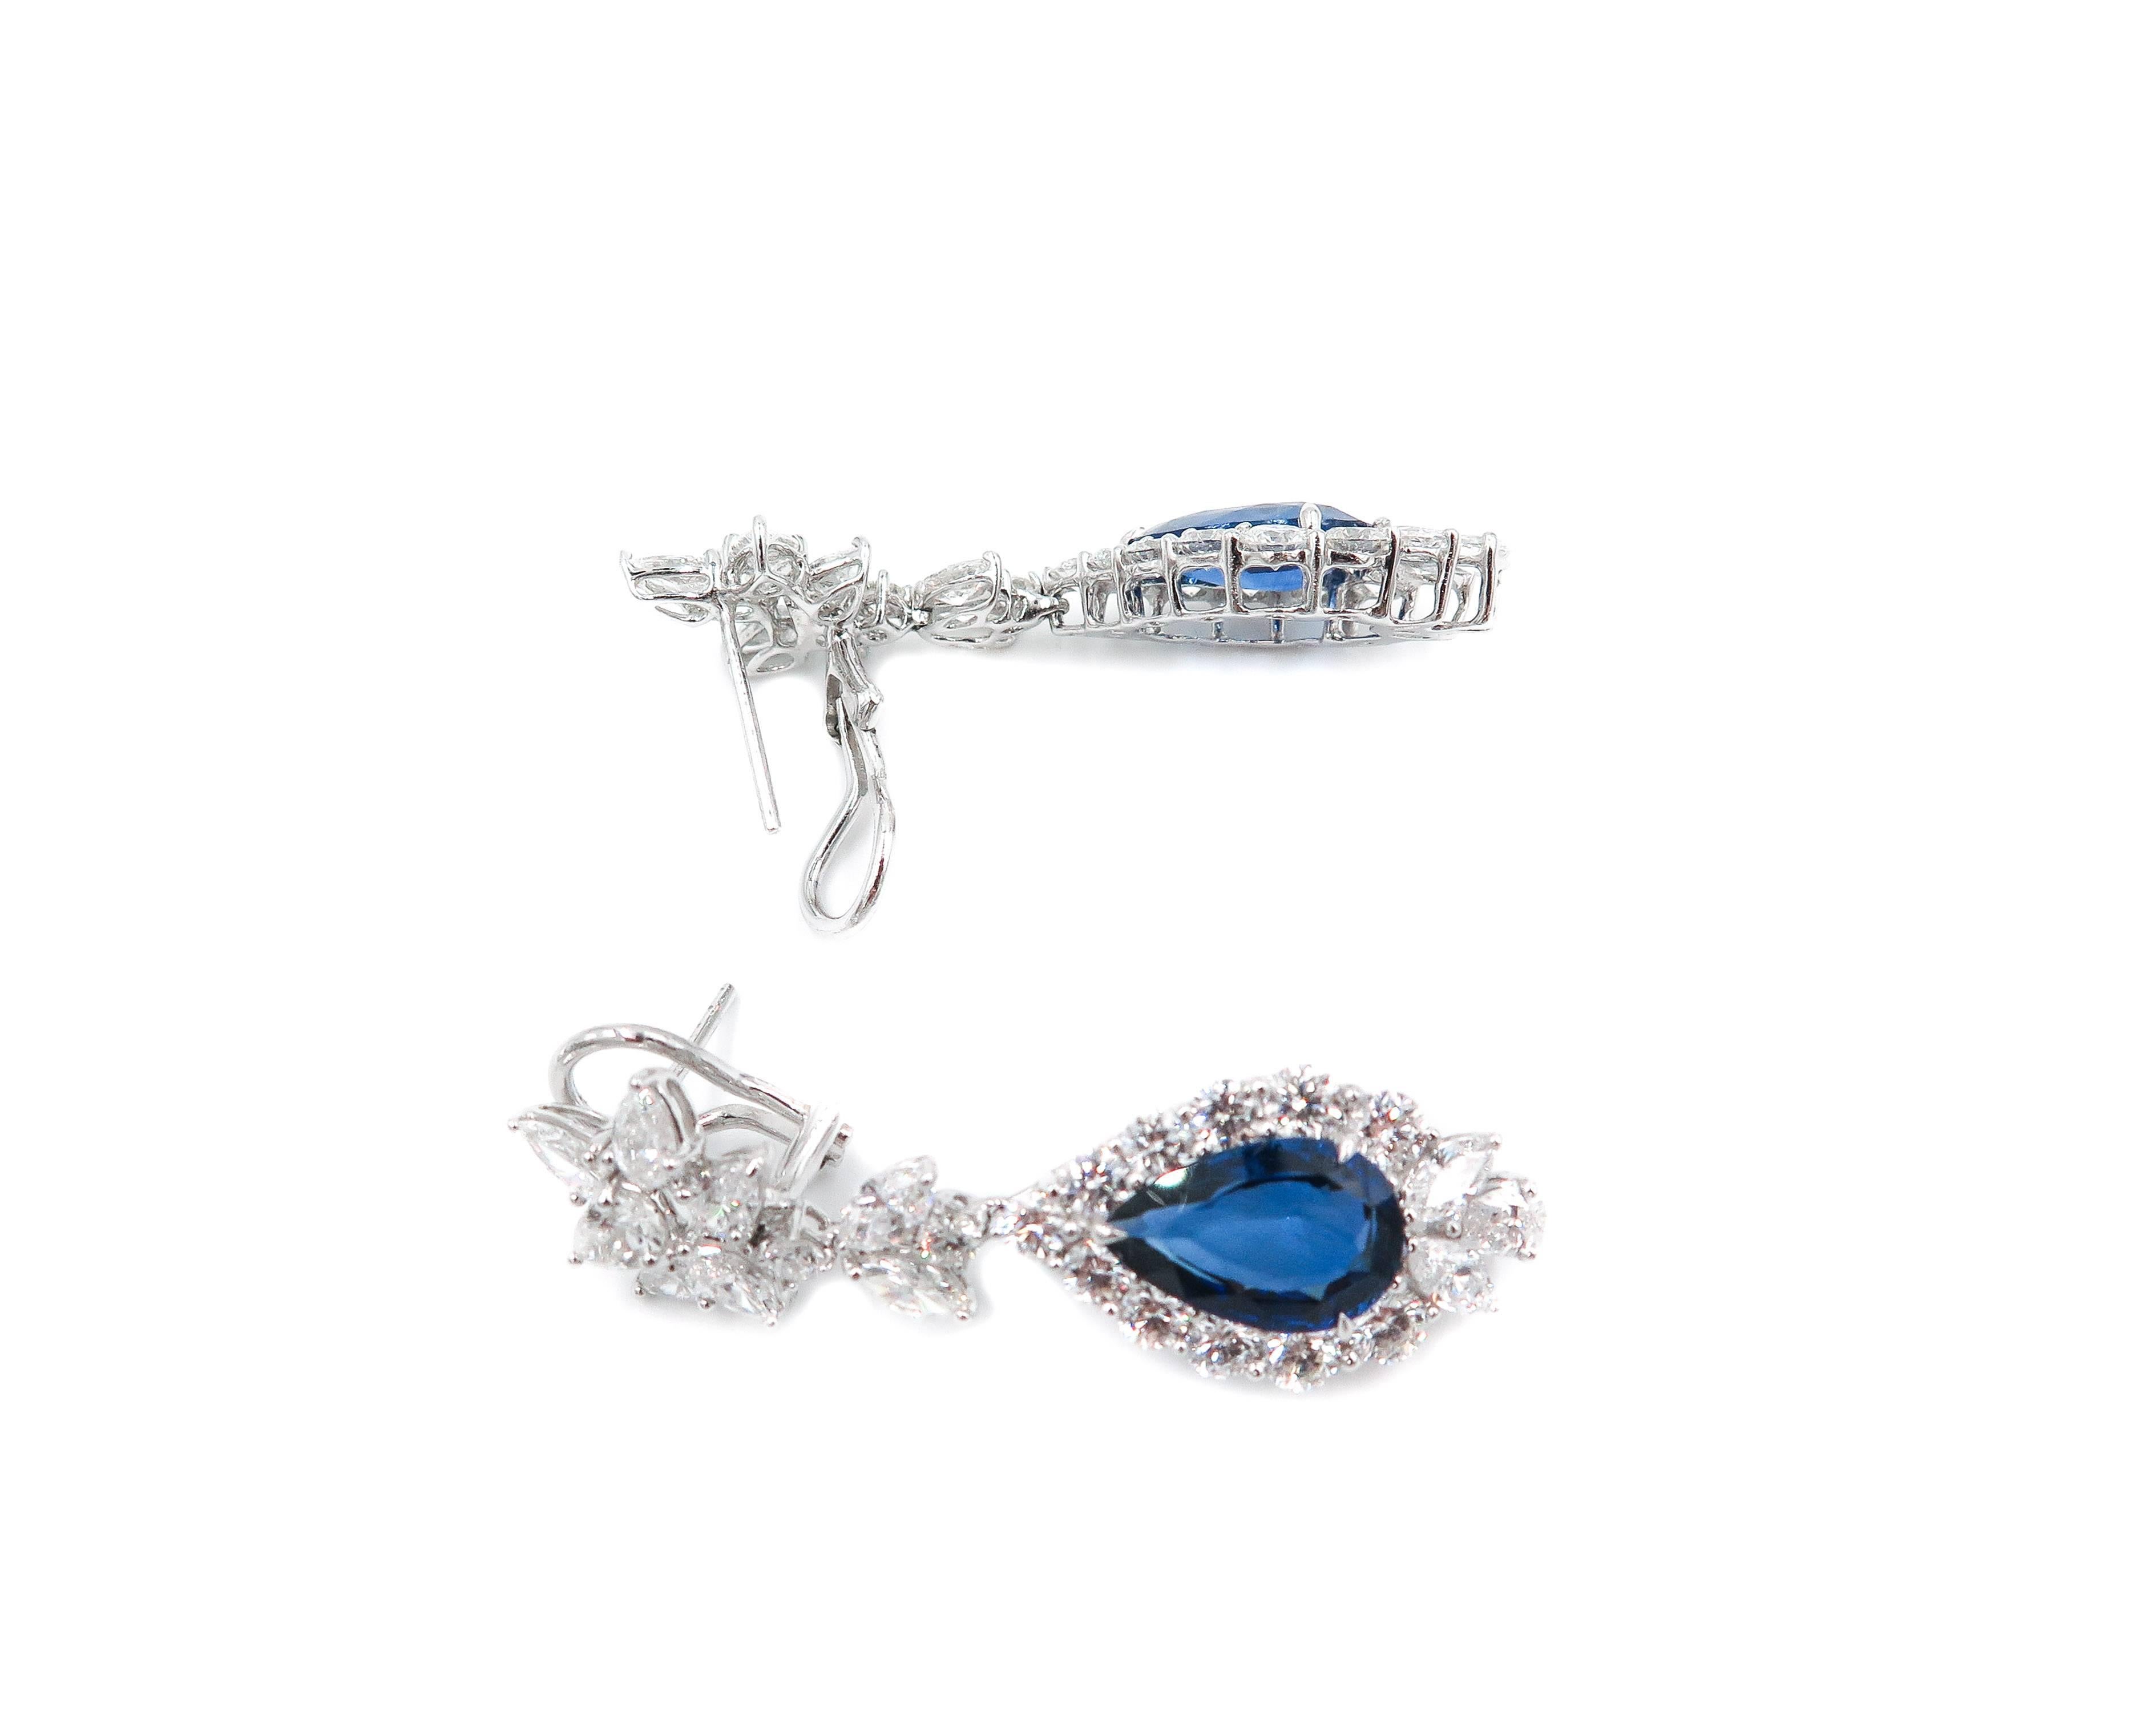 While precious gems inspire and command attention, fantasy and dream prevails in the design of these precious earrings transforming a pair of fine pear shaped blue sapphires and diamonds into a jewelry of distinction.
The sapphires weigh 9.43 carats